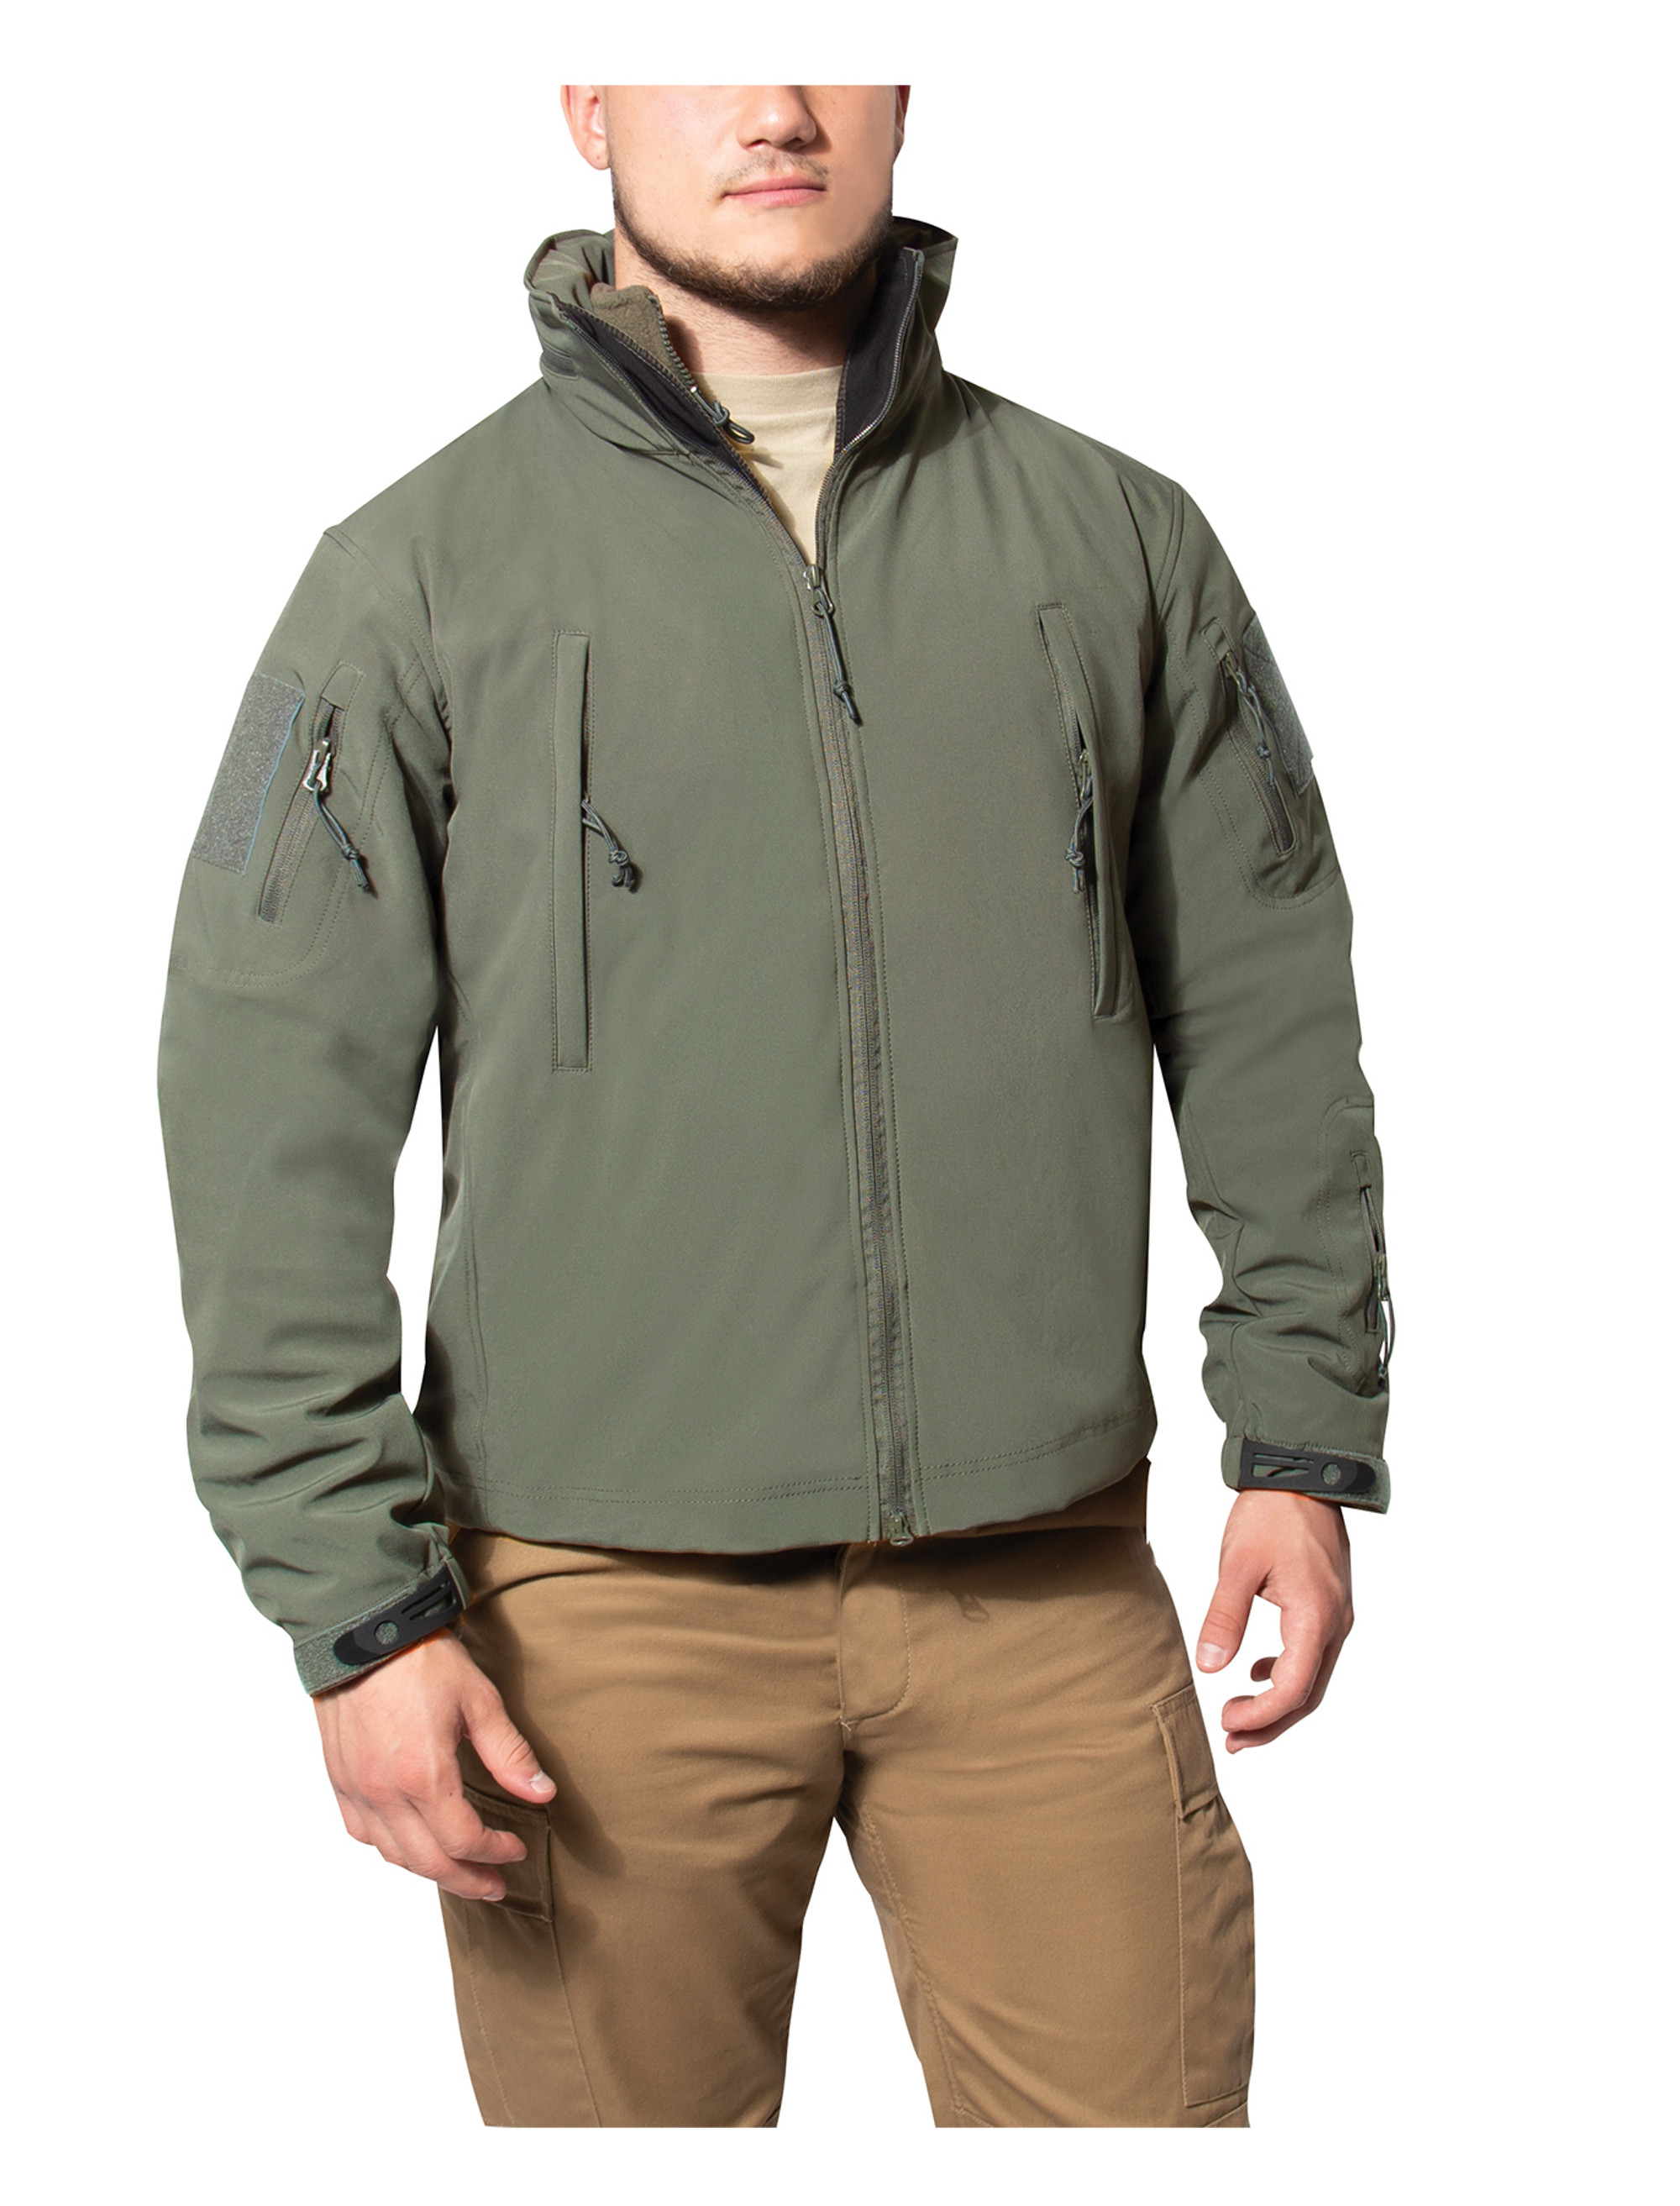 Rothco 3-in-1 Spec Ops Soft Shell Jacket - Olive Drab